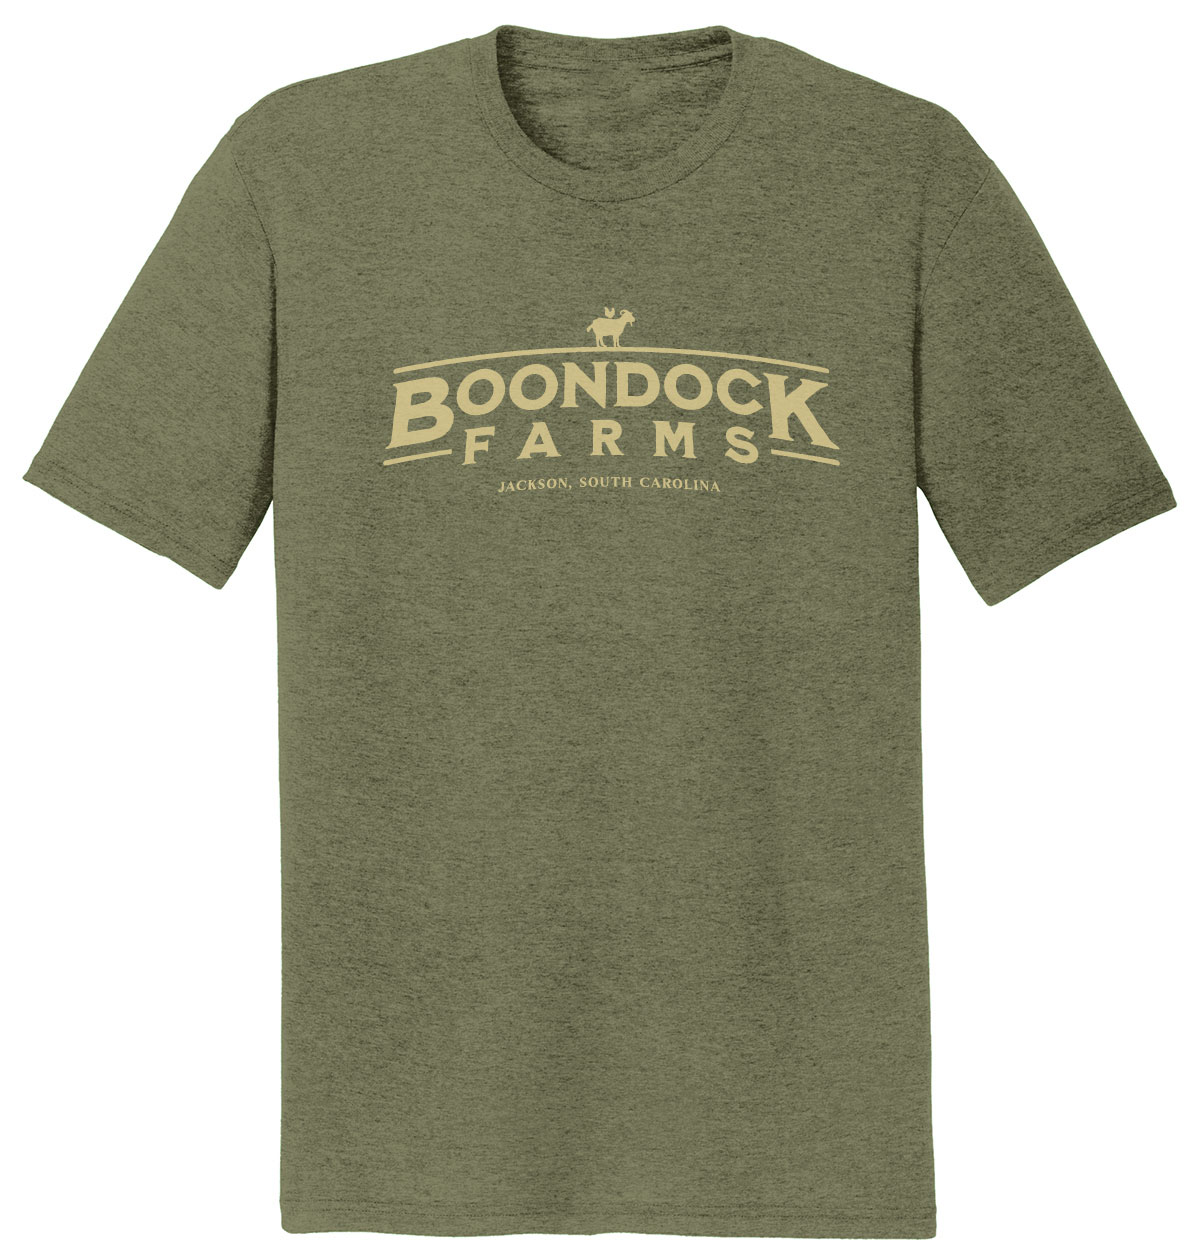 Boondock Farms - We Give a Shirt